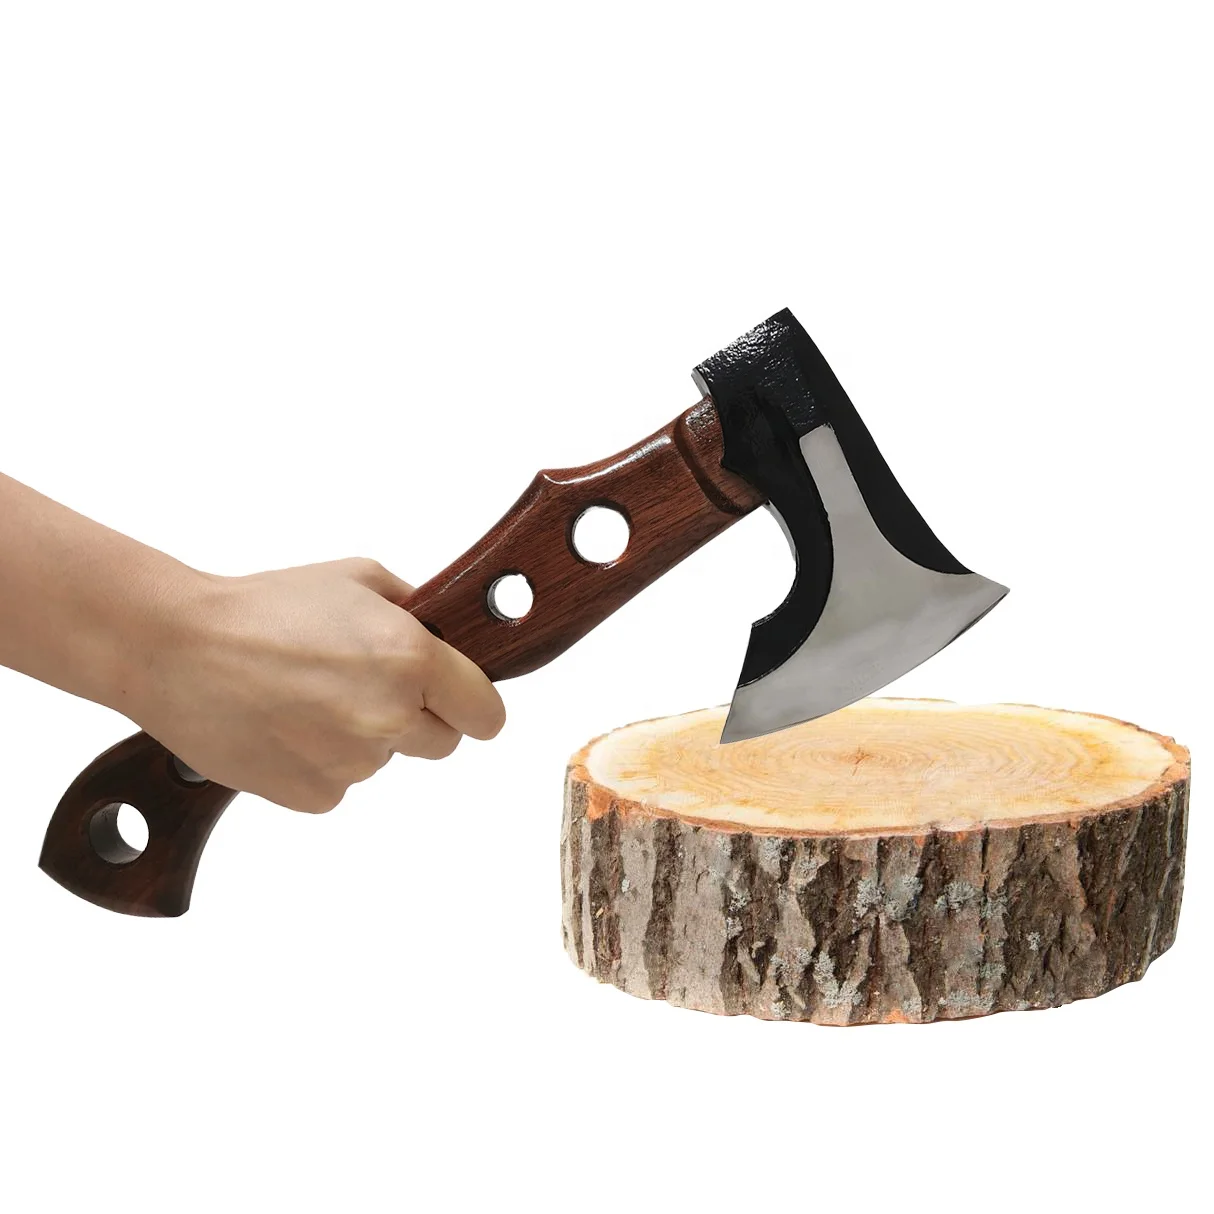 Customizable Camp Survival Felling Axe Forging Cutting Hatchet Hunting Axe Splitting Camping Axe with Bamboo Handle for Outdoor